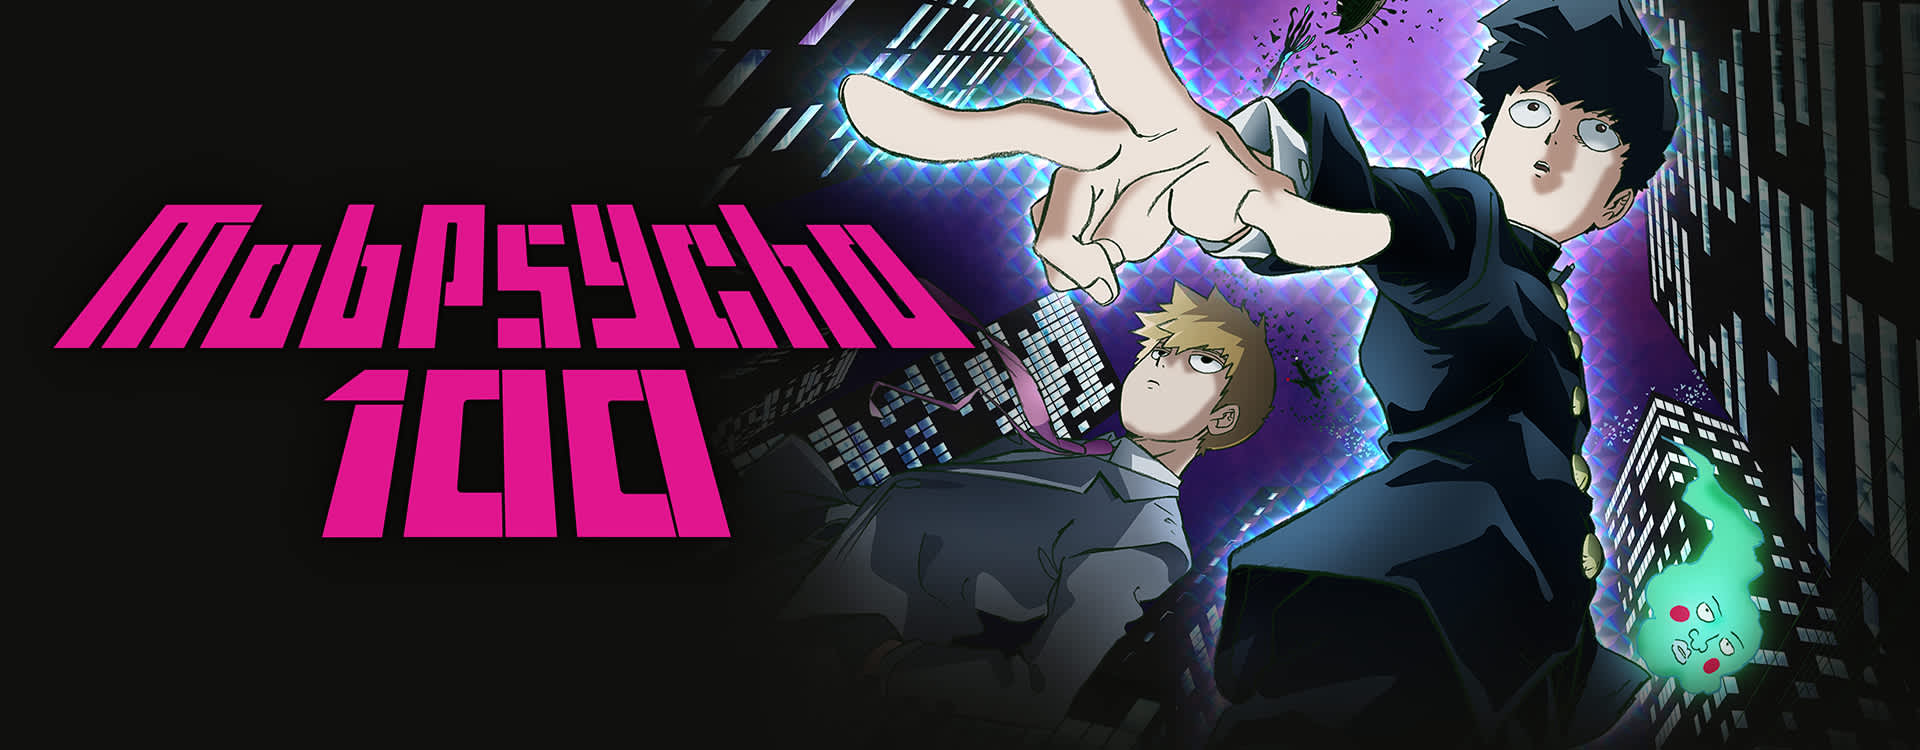 Crunchyroll & Fathom Events Partnership Launches Mob Psycho 100 II  Theater Premiere